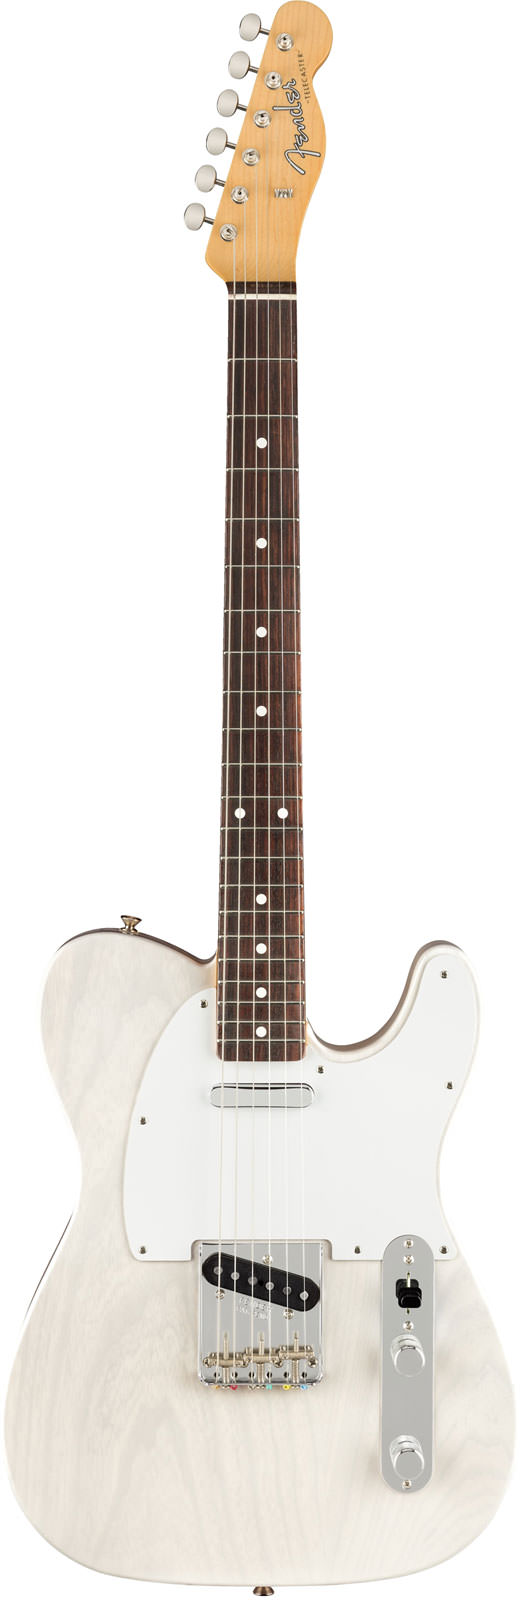 FENDER JIMMY PAGE Telecaster MIRROR RW White Blonde - фото 1